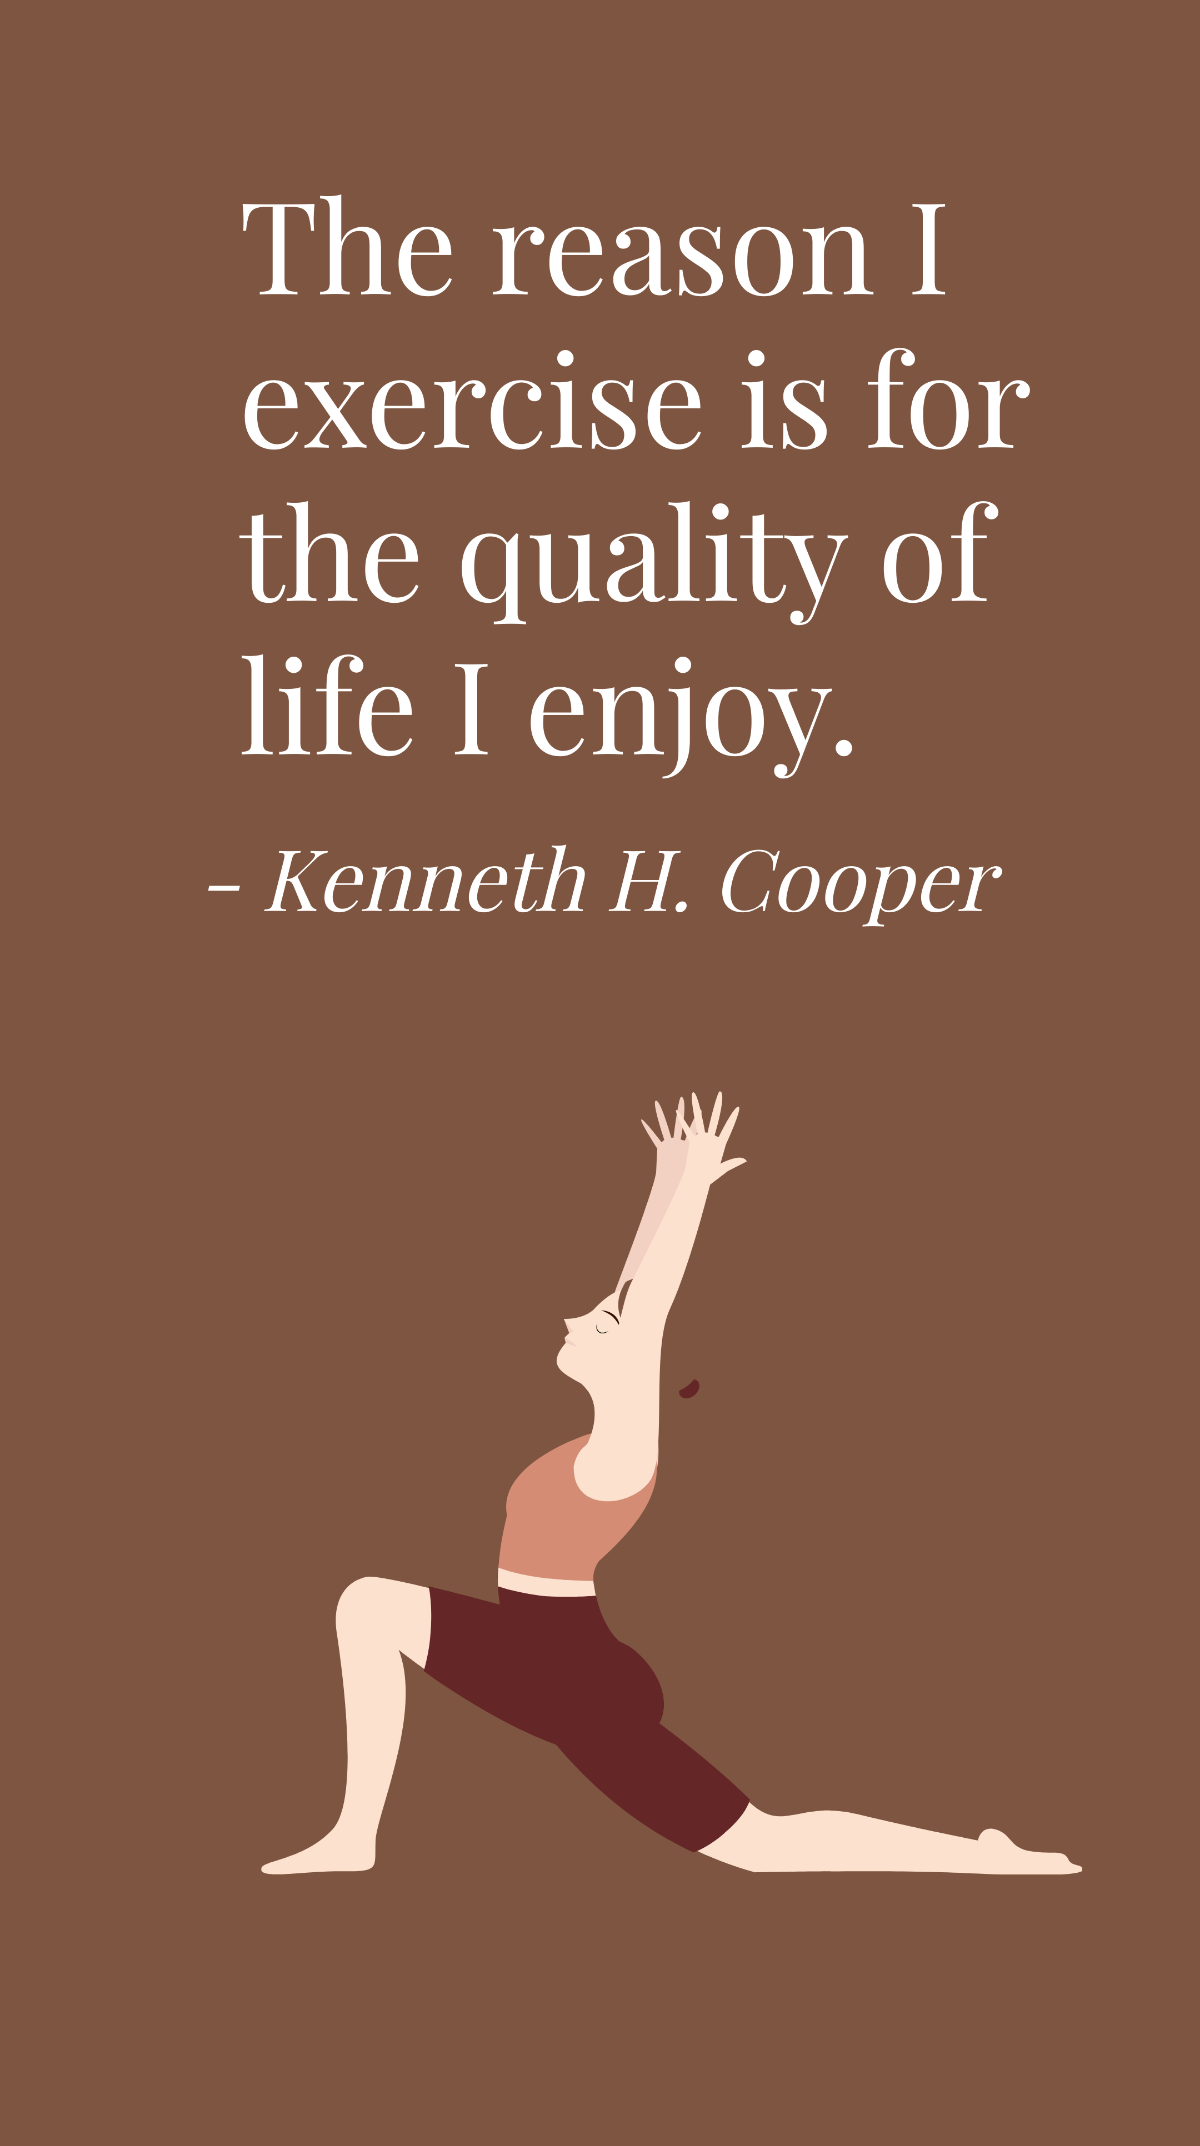 Free Kenneth H. Cooper - The reason I exercise is for the quality of life I enjoy. Template